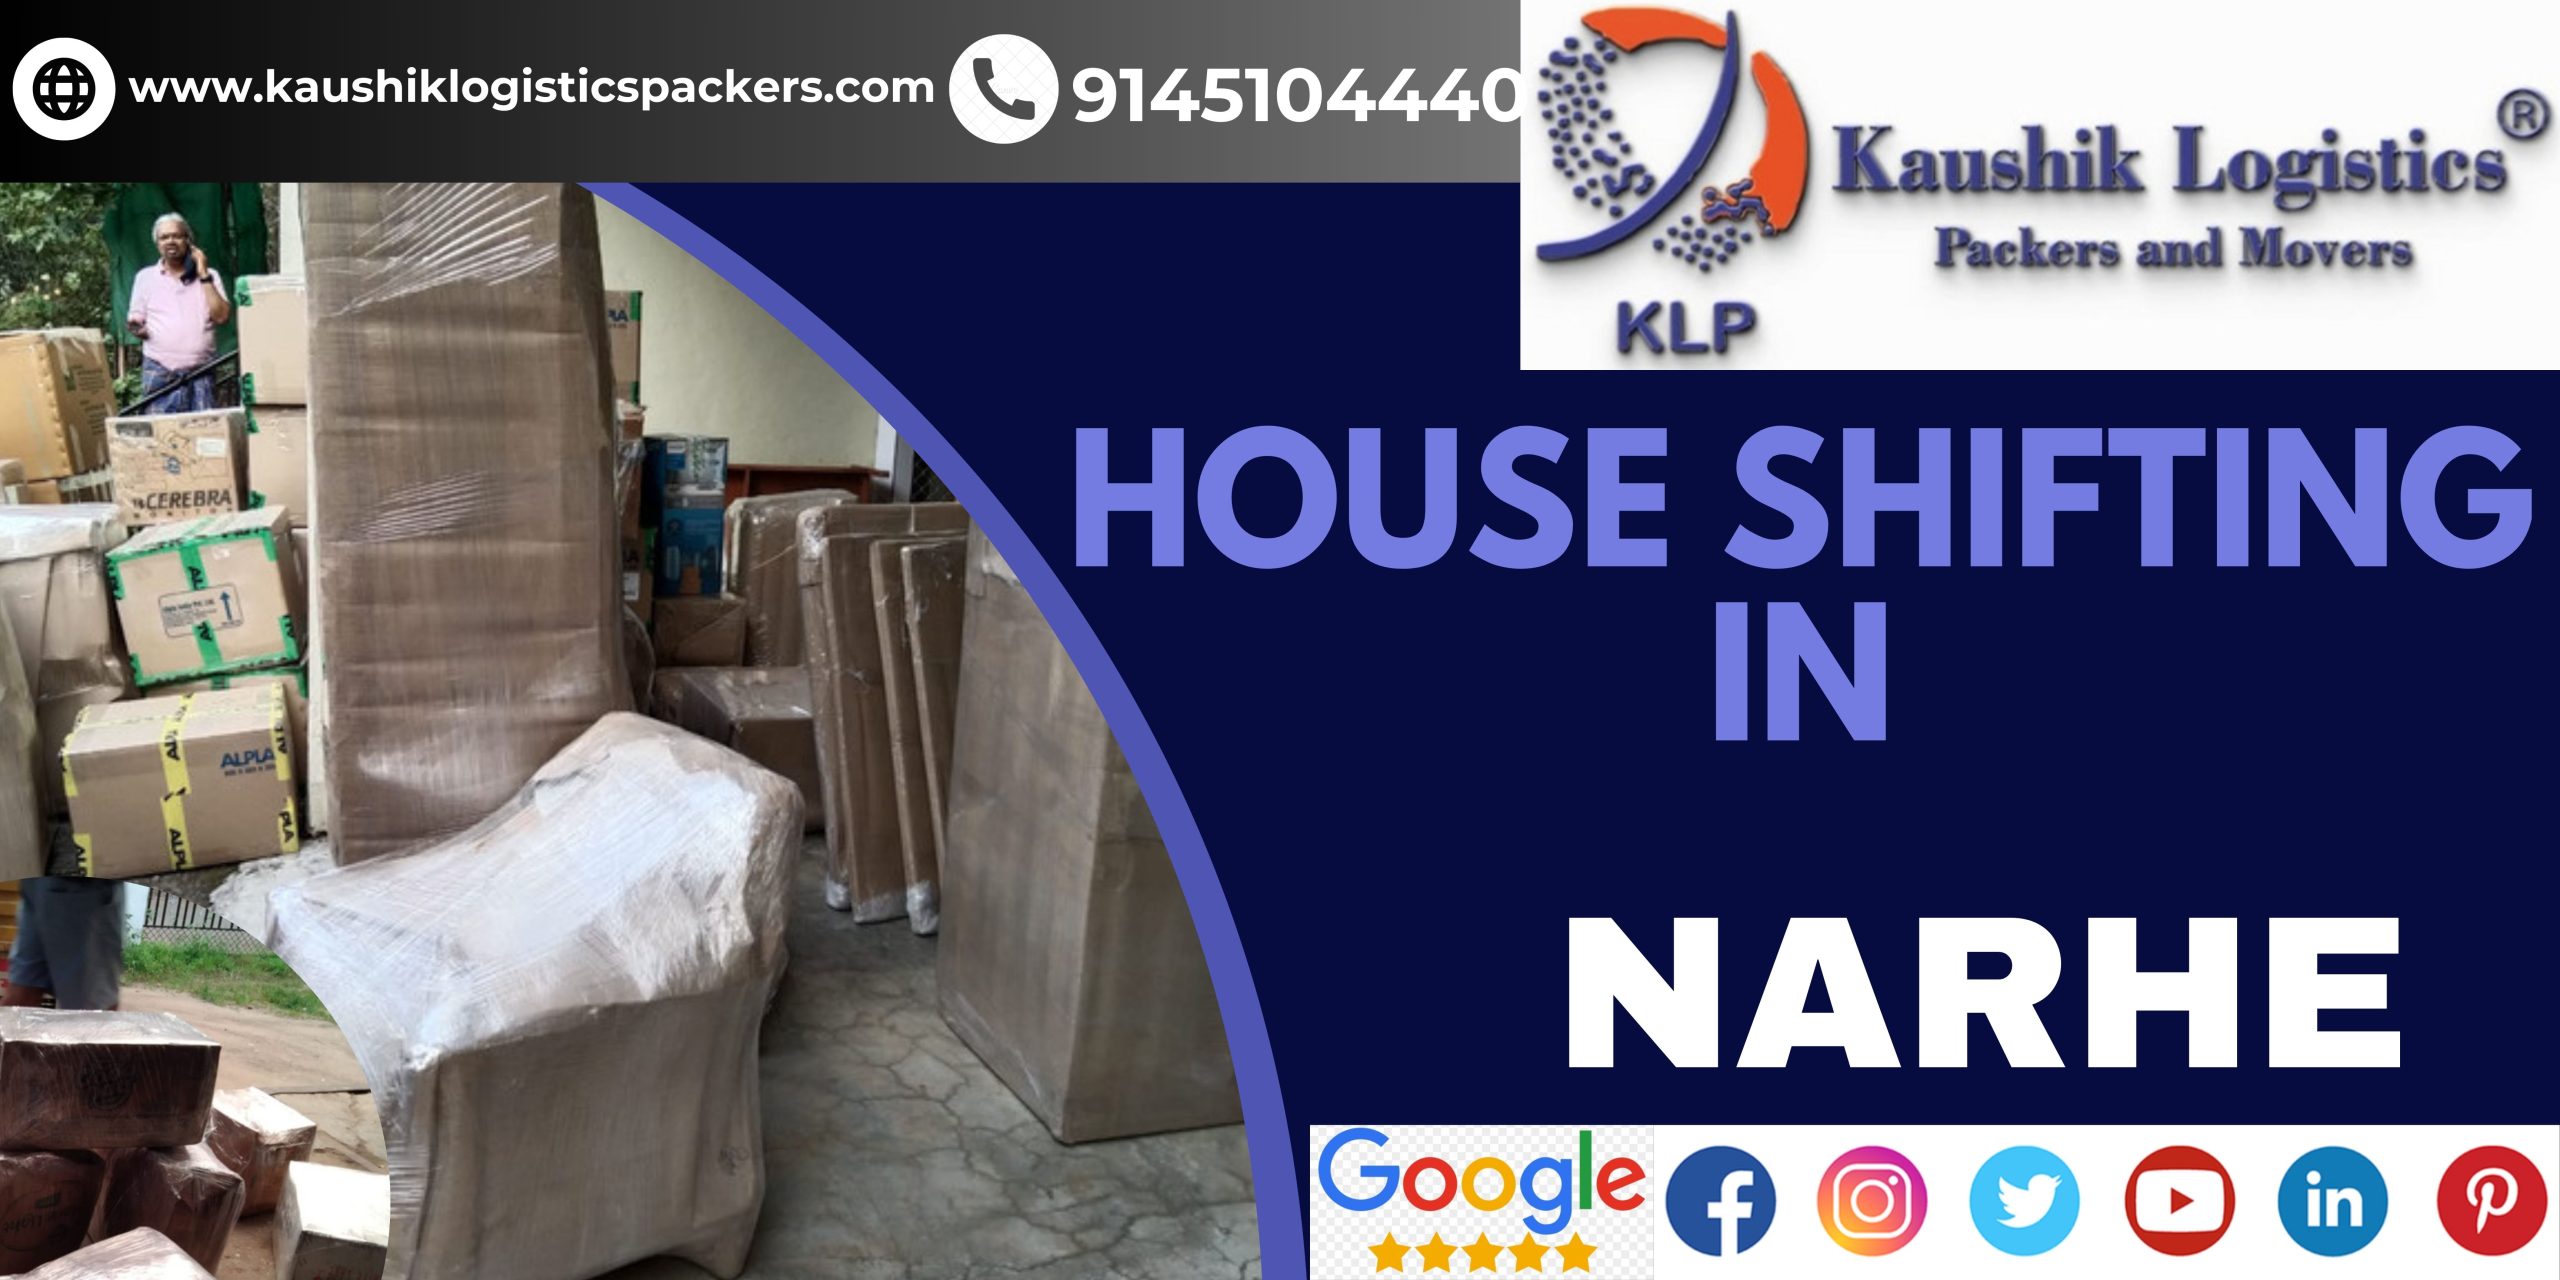 Packers and Movers In Narhe